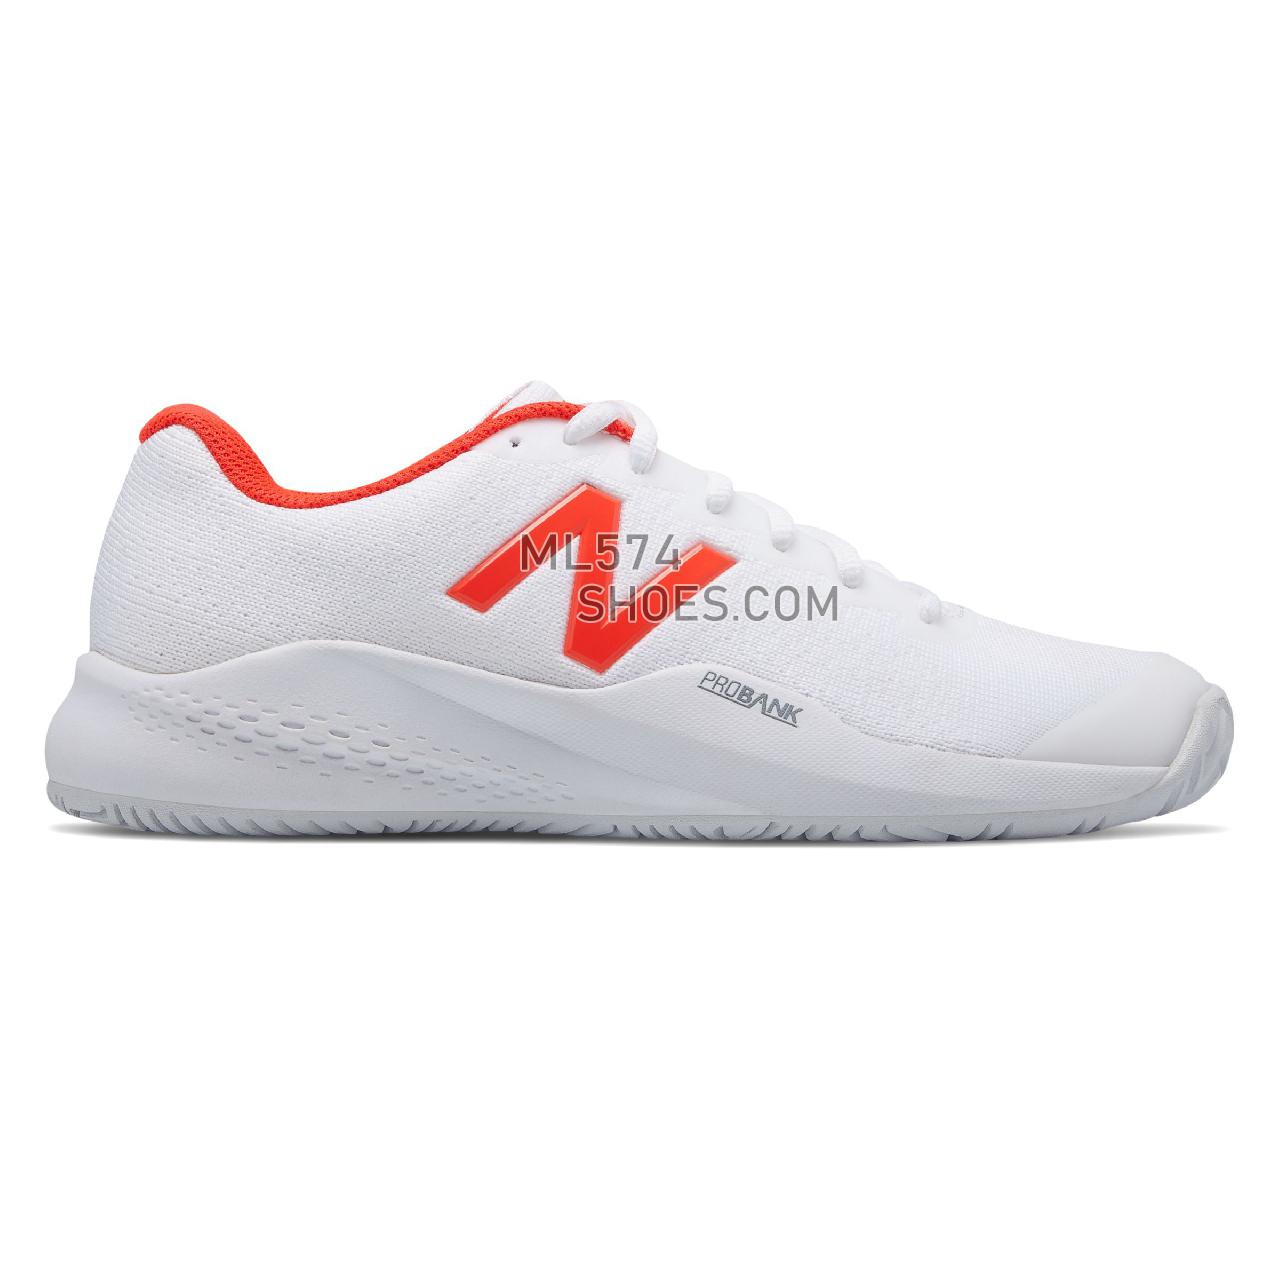 New Balance 996v3 - Women's 996 - Tennis / Court White with Flame - WCH996Z3